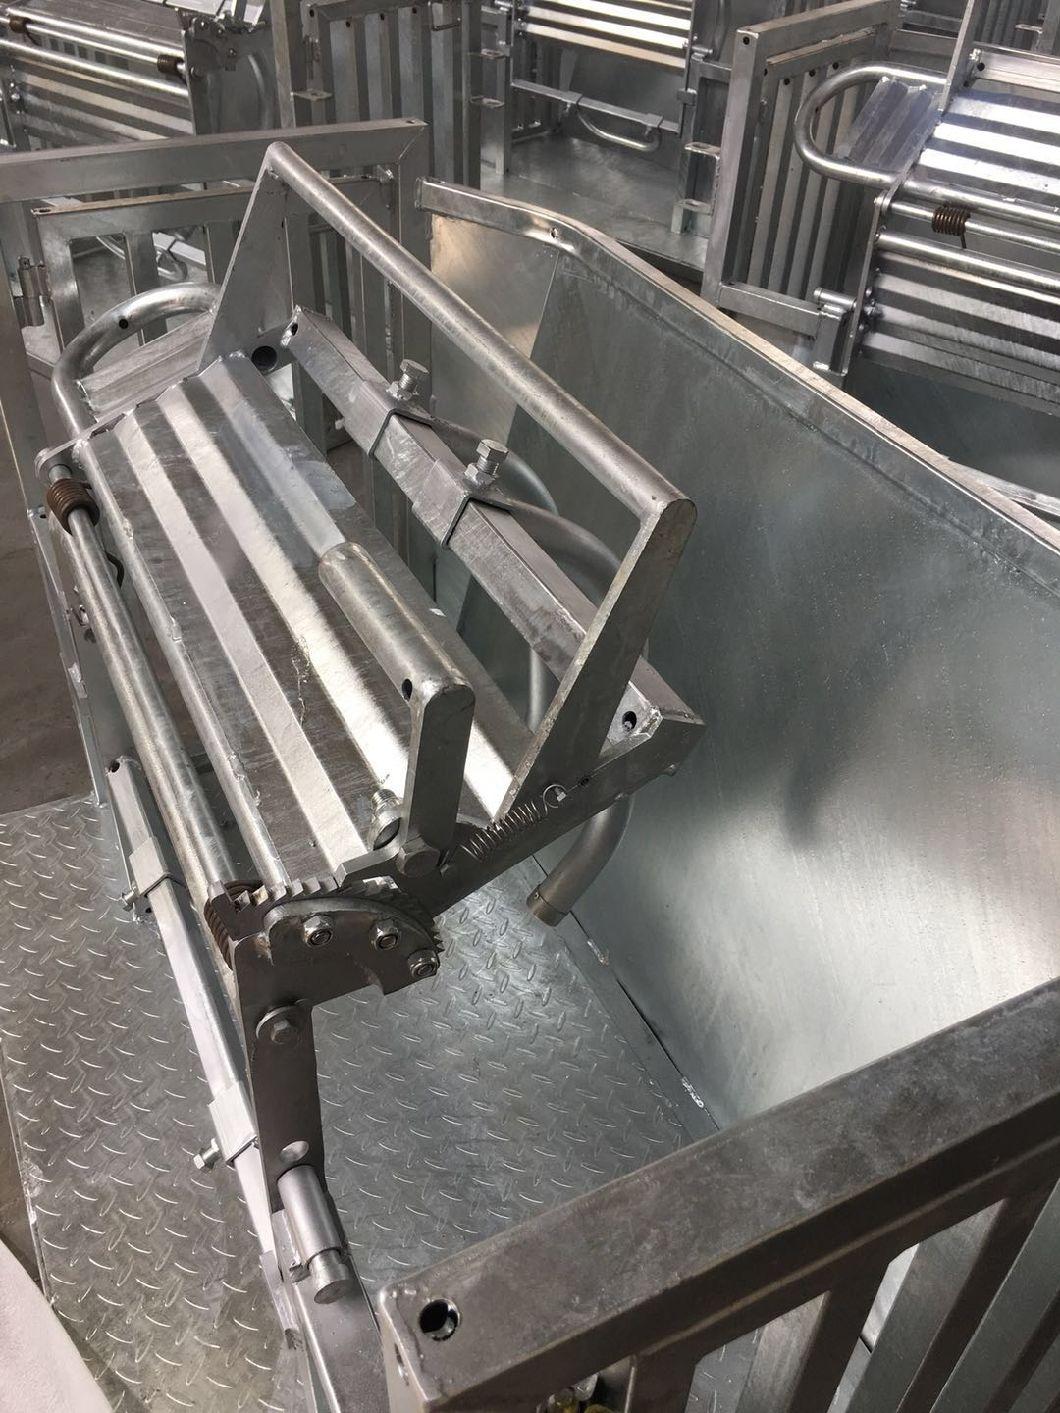 Galvanized Sheep Turnover Crate Used for Handling Equipment